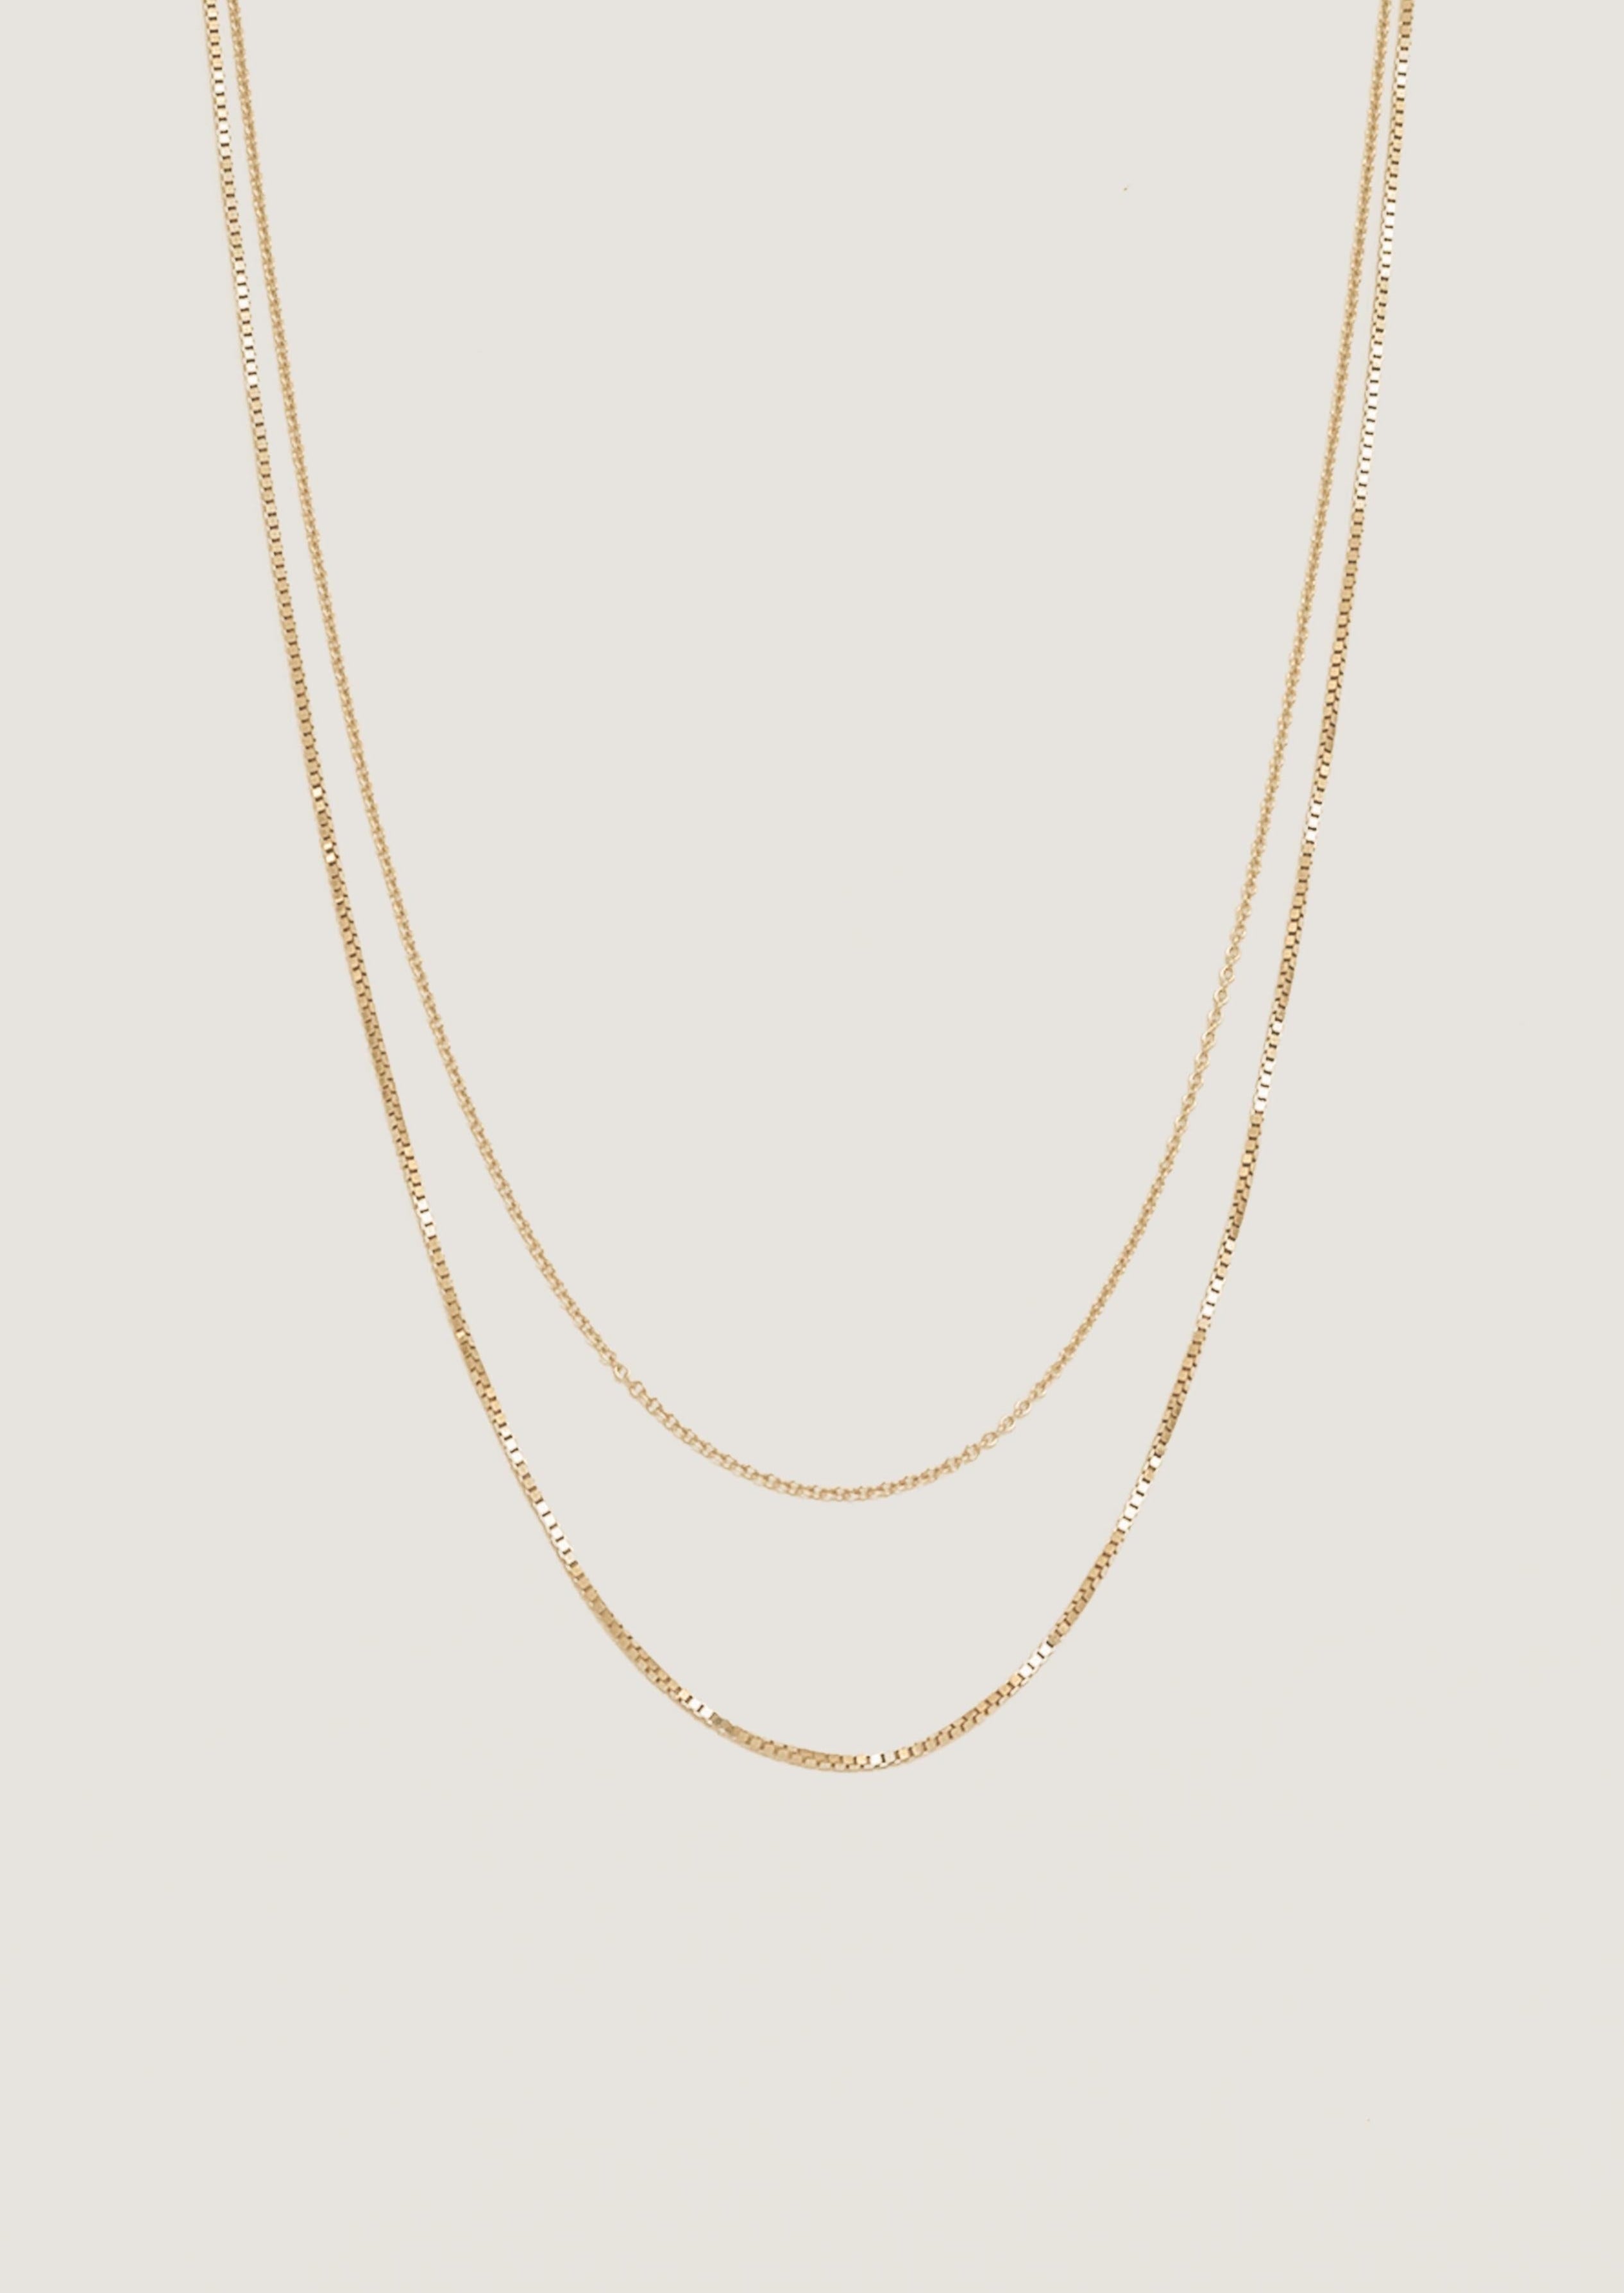 alt="Rolo Link & Box Chain Necklace Stack"